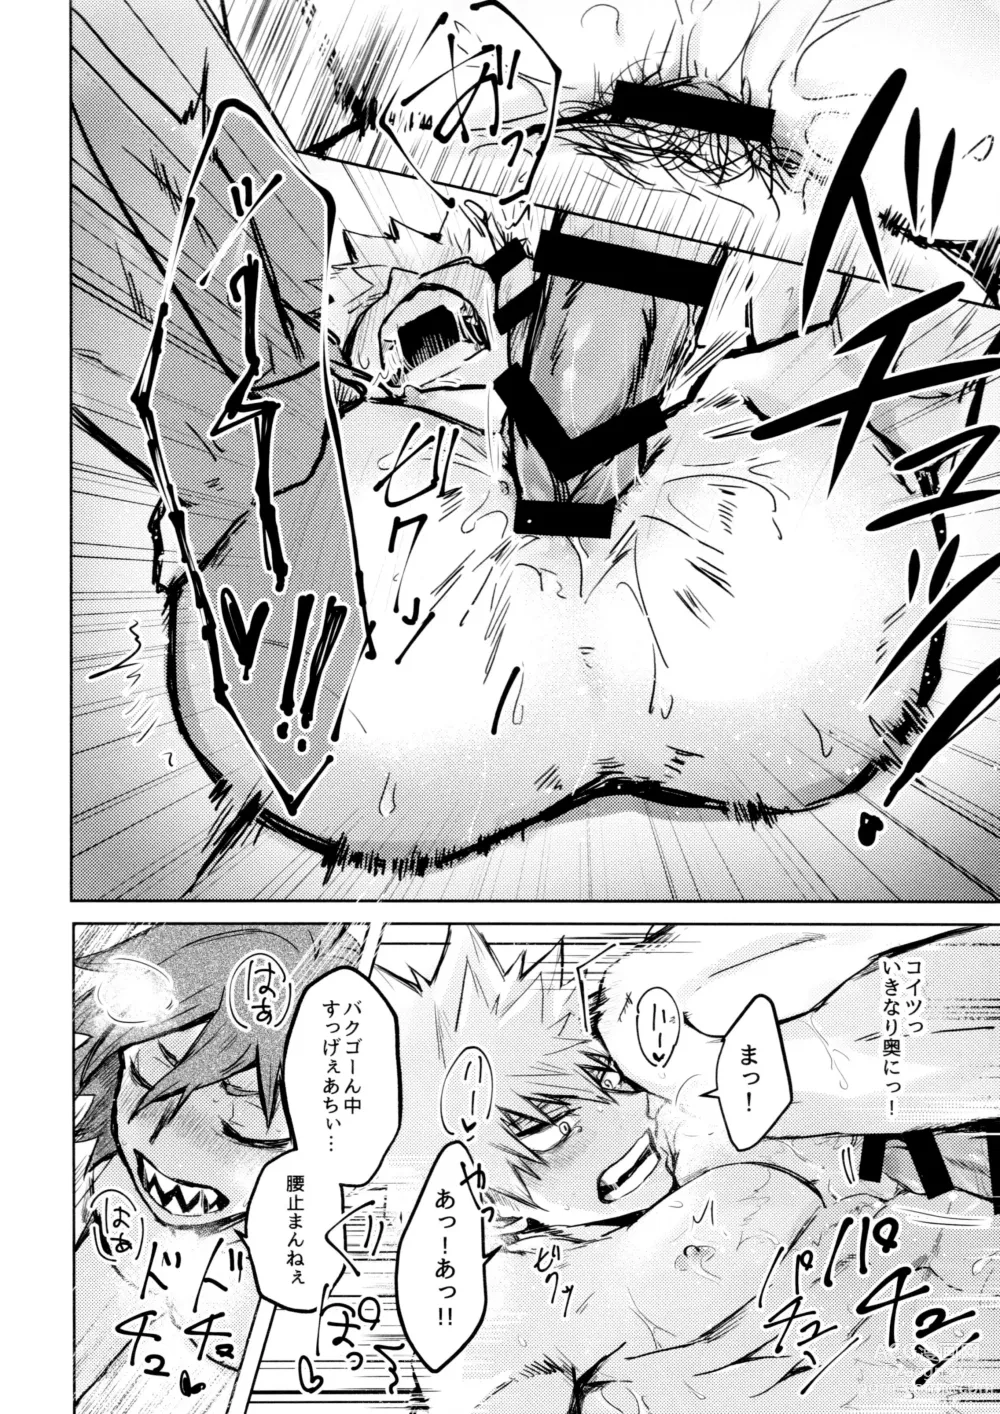 Page 14 of doujinshi INVOLVED WITH